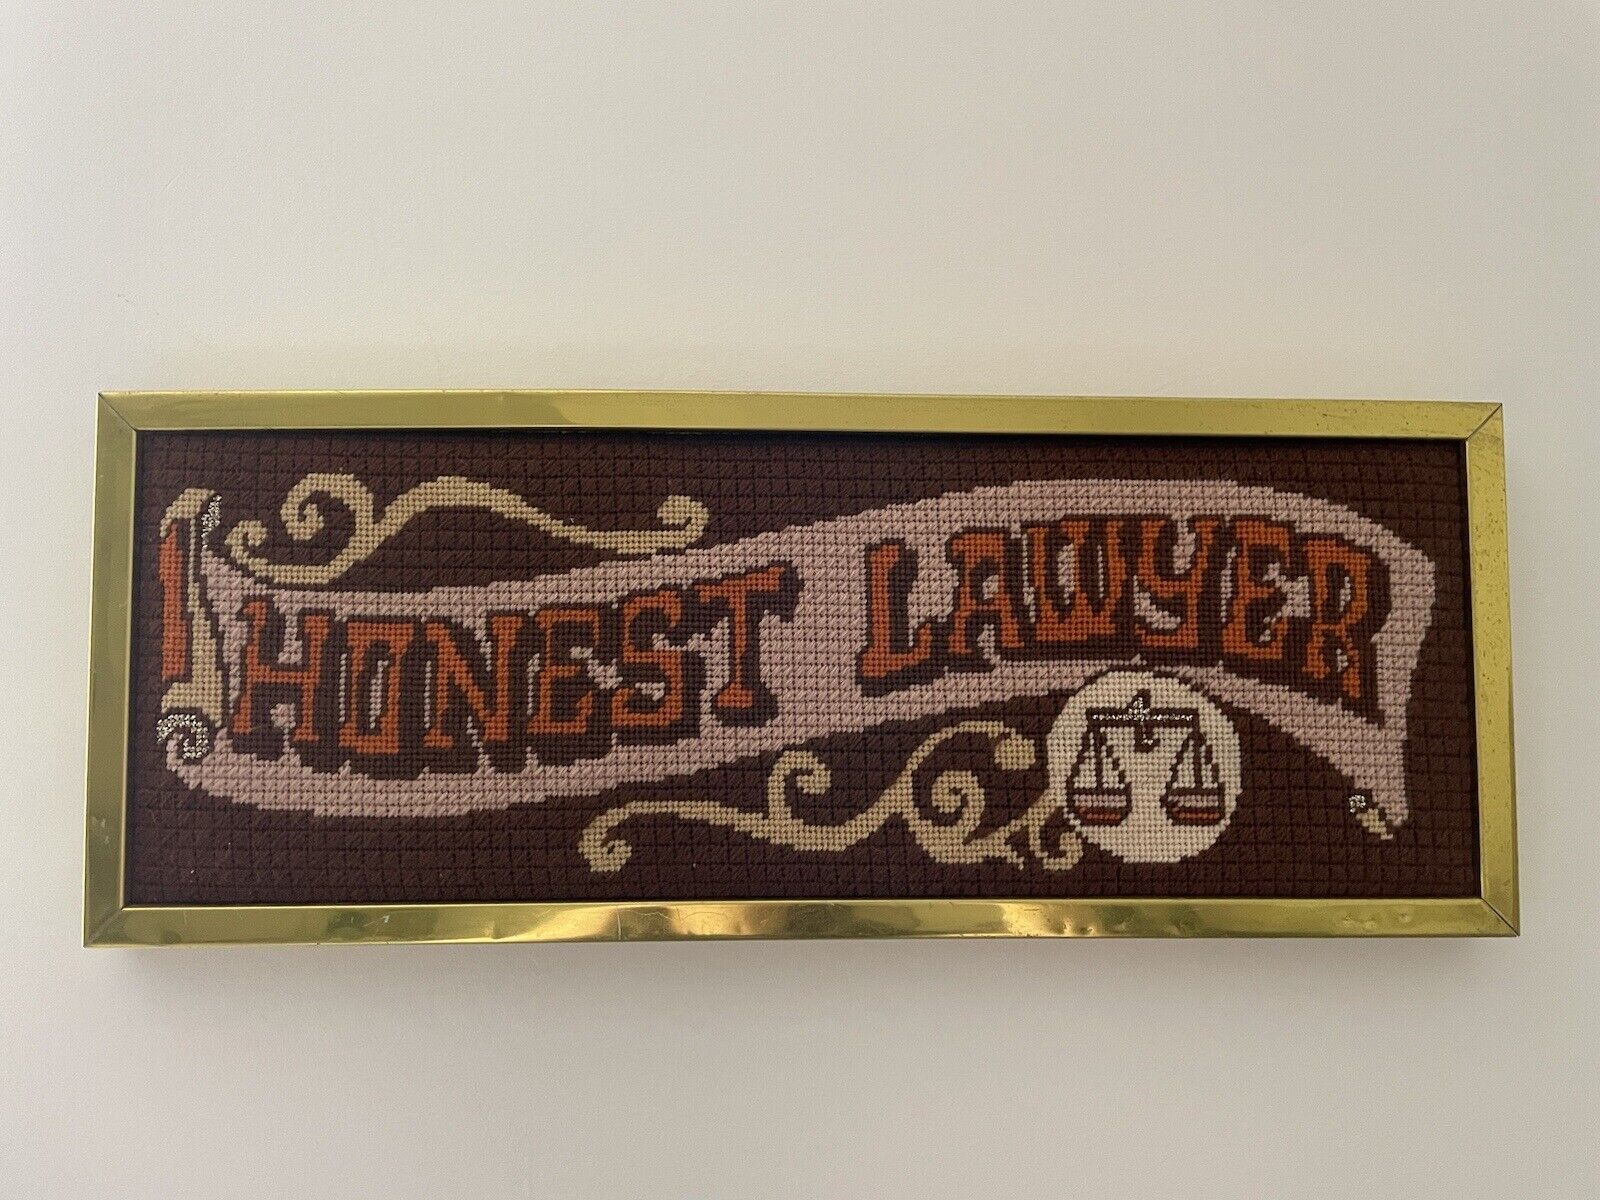 Vintage Honest Lawyer Wall Sign Art Embroidered Handmade Funny Gift Legal Law